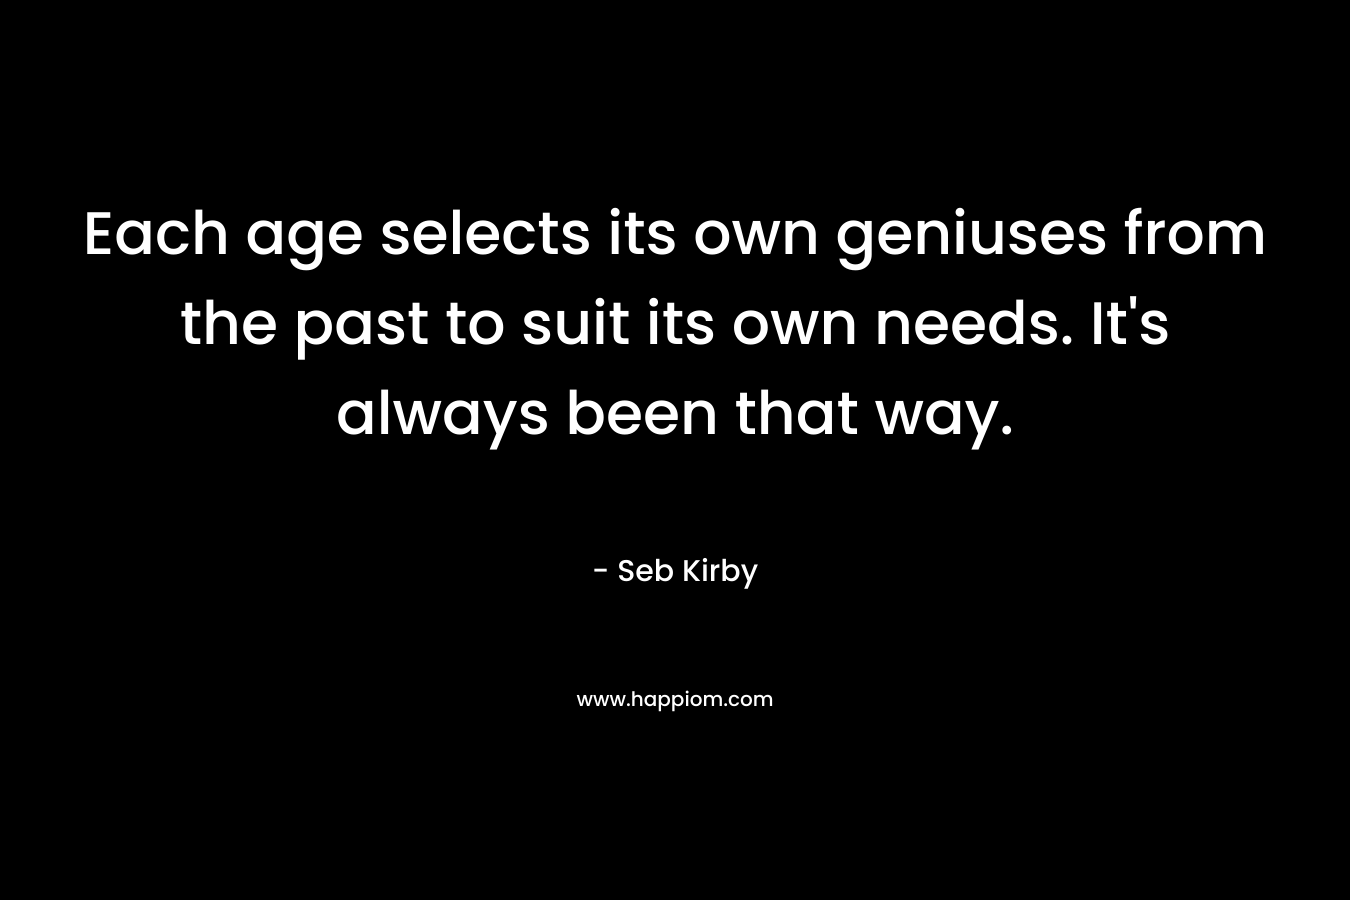 Each age selects its own geniuses from the past to suit its own needs. It's always been that way.